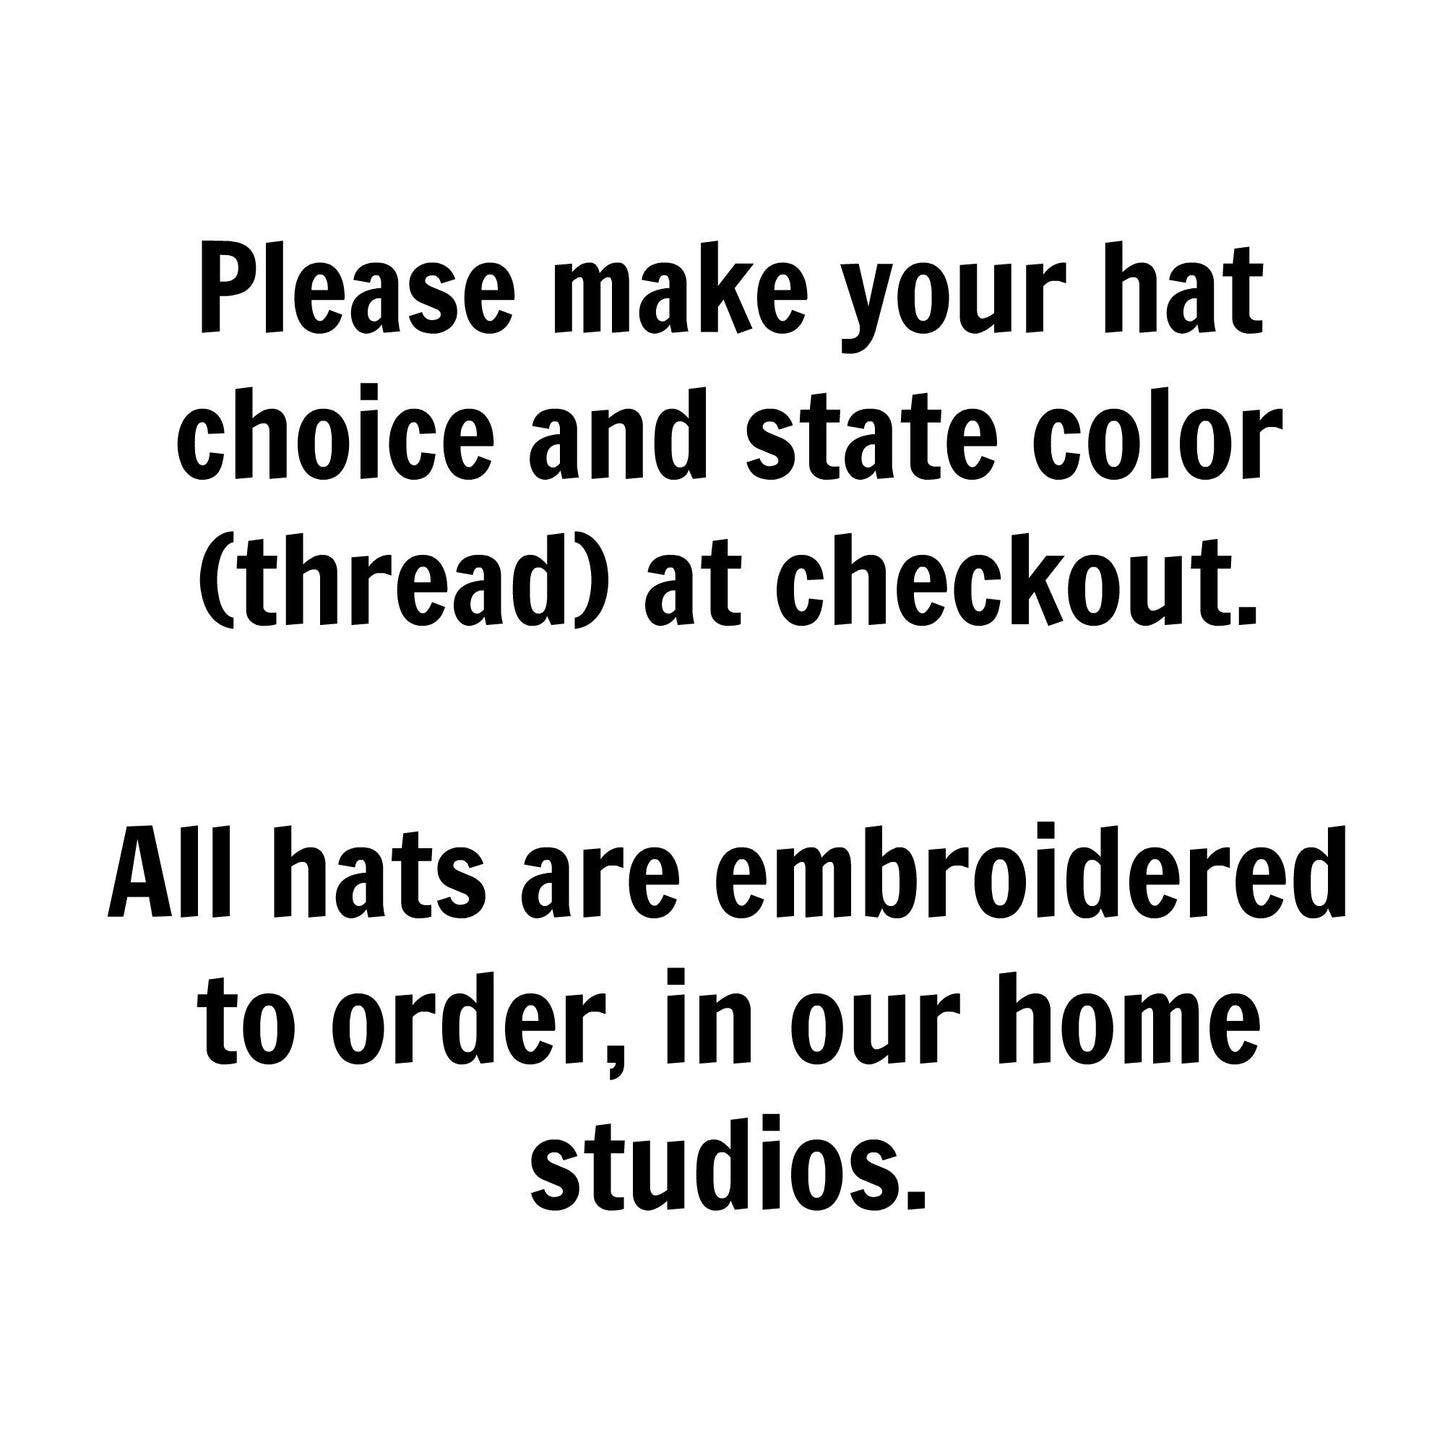 Illinois Hat - Classic Dad Hat - Many Color Combinations